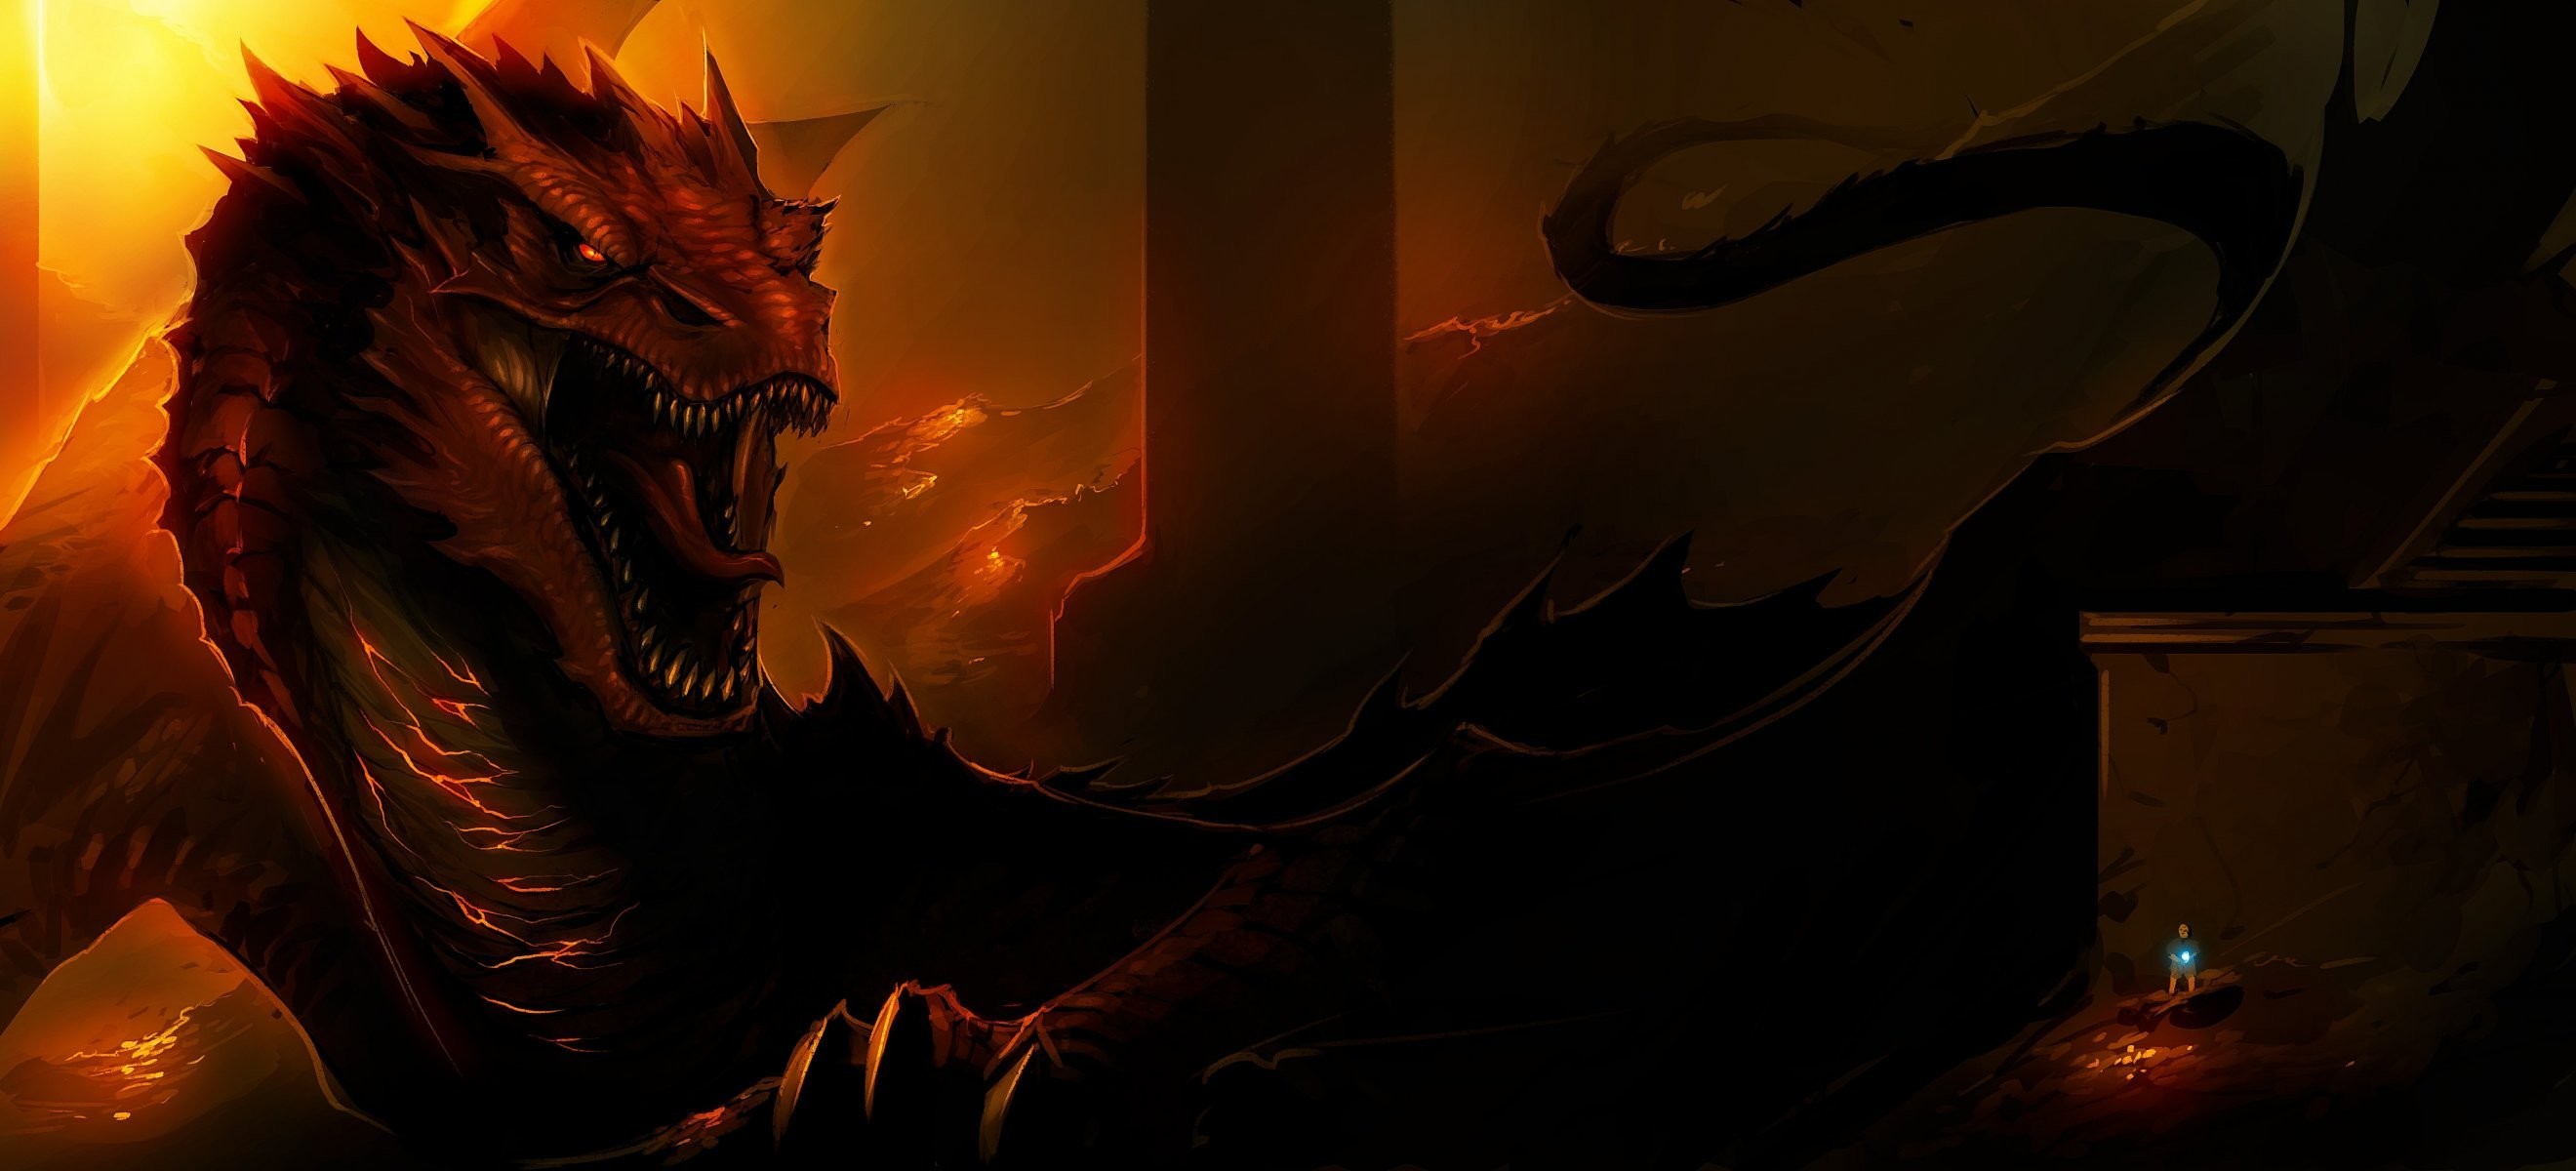 2640x1200 smaug lord of the rings fire dragon art the hobbit the hobbit: the  desolation of